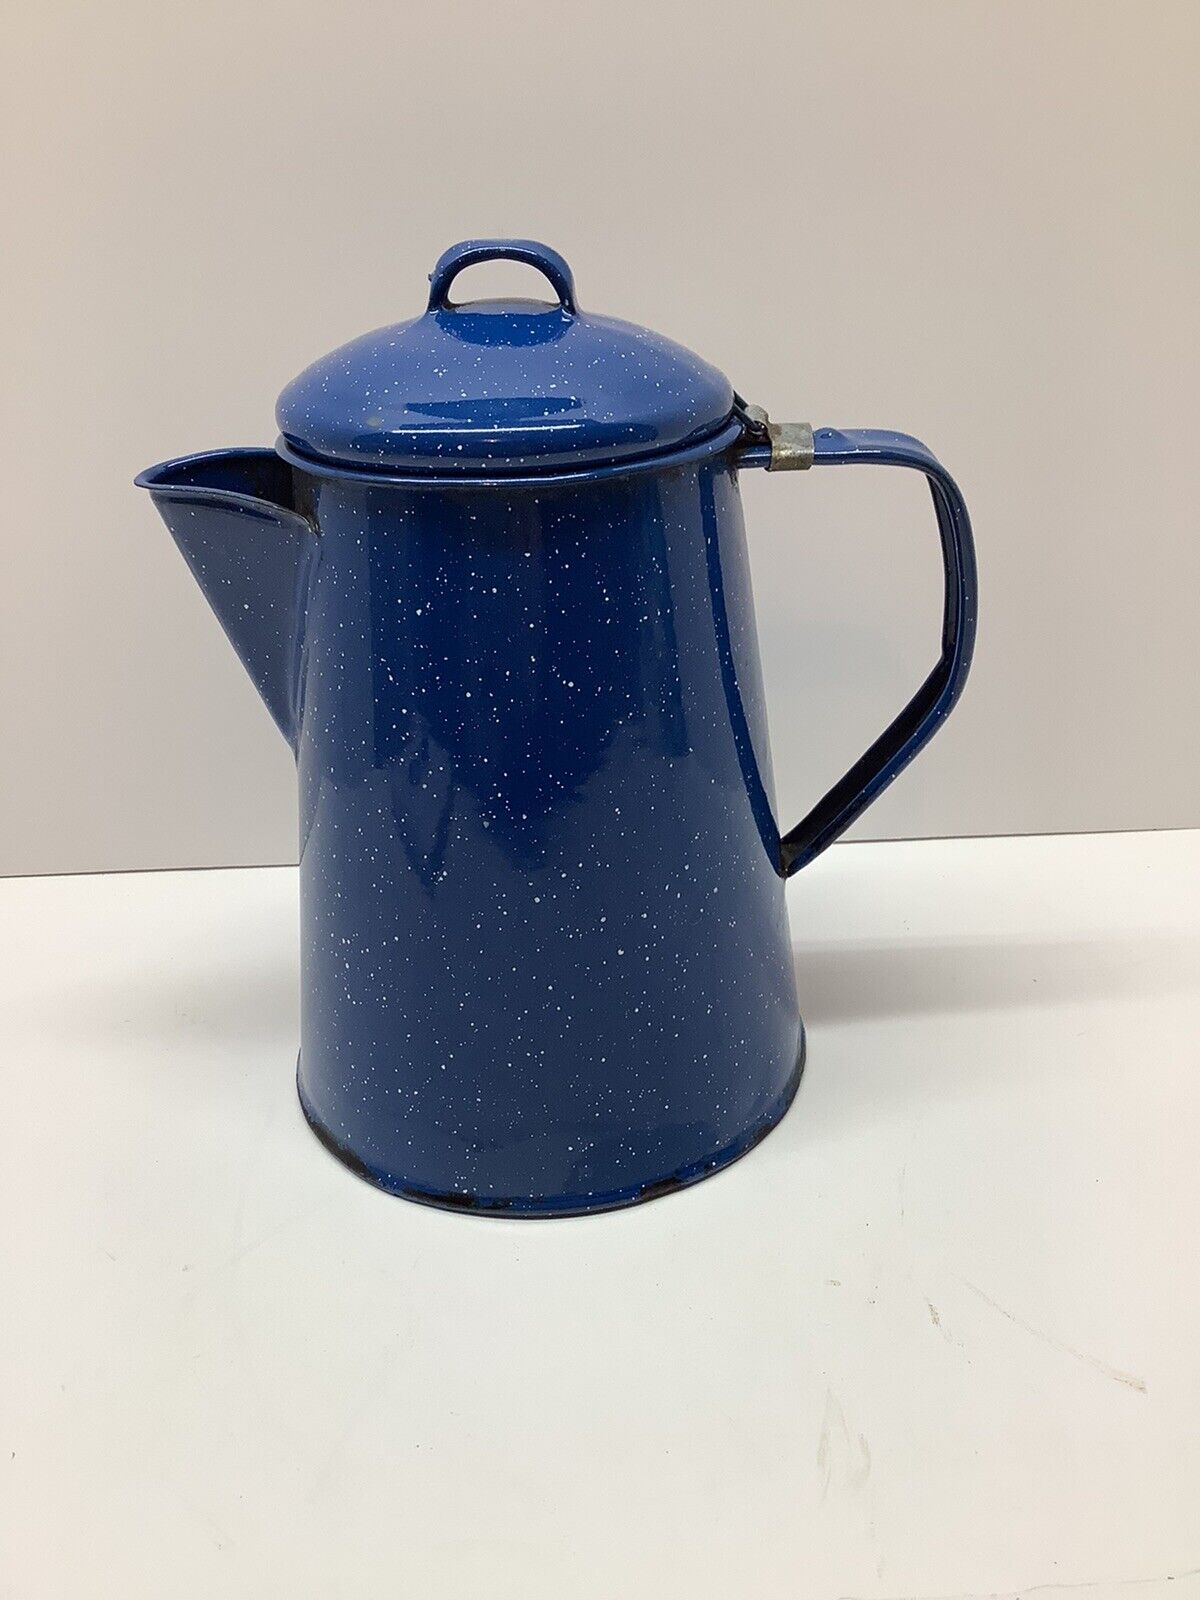 Vintage blue and white speckled enamel coffee/tea kettle 8”T home camp rv